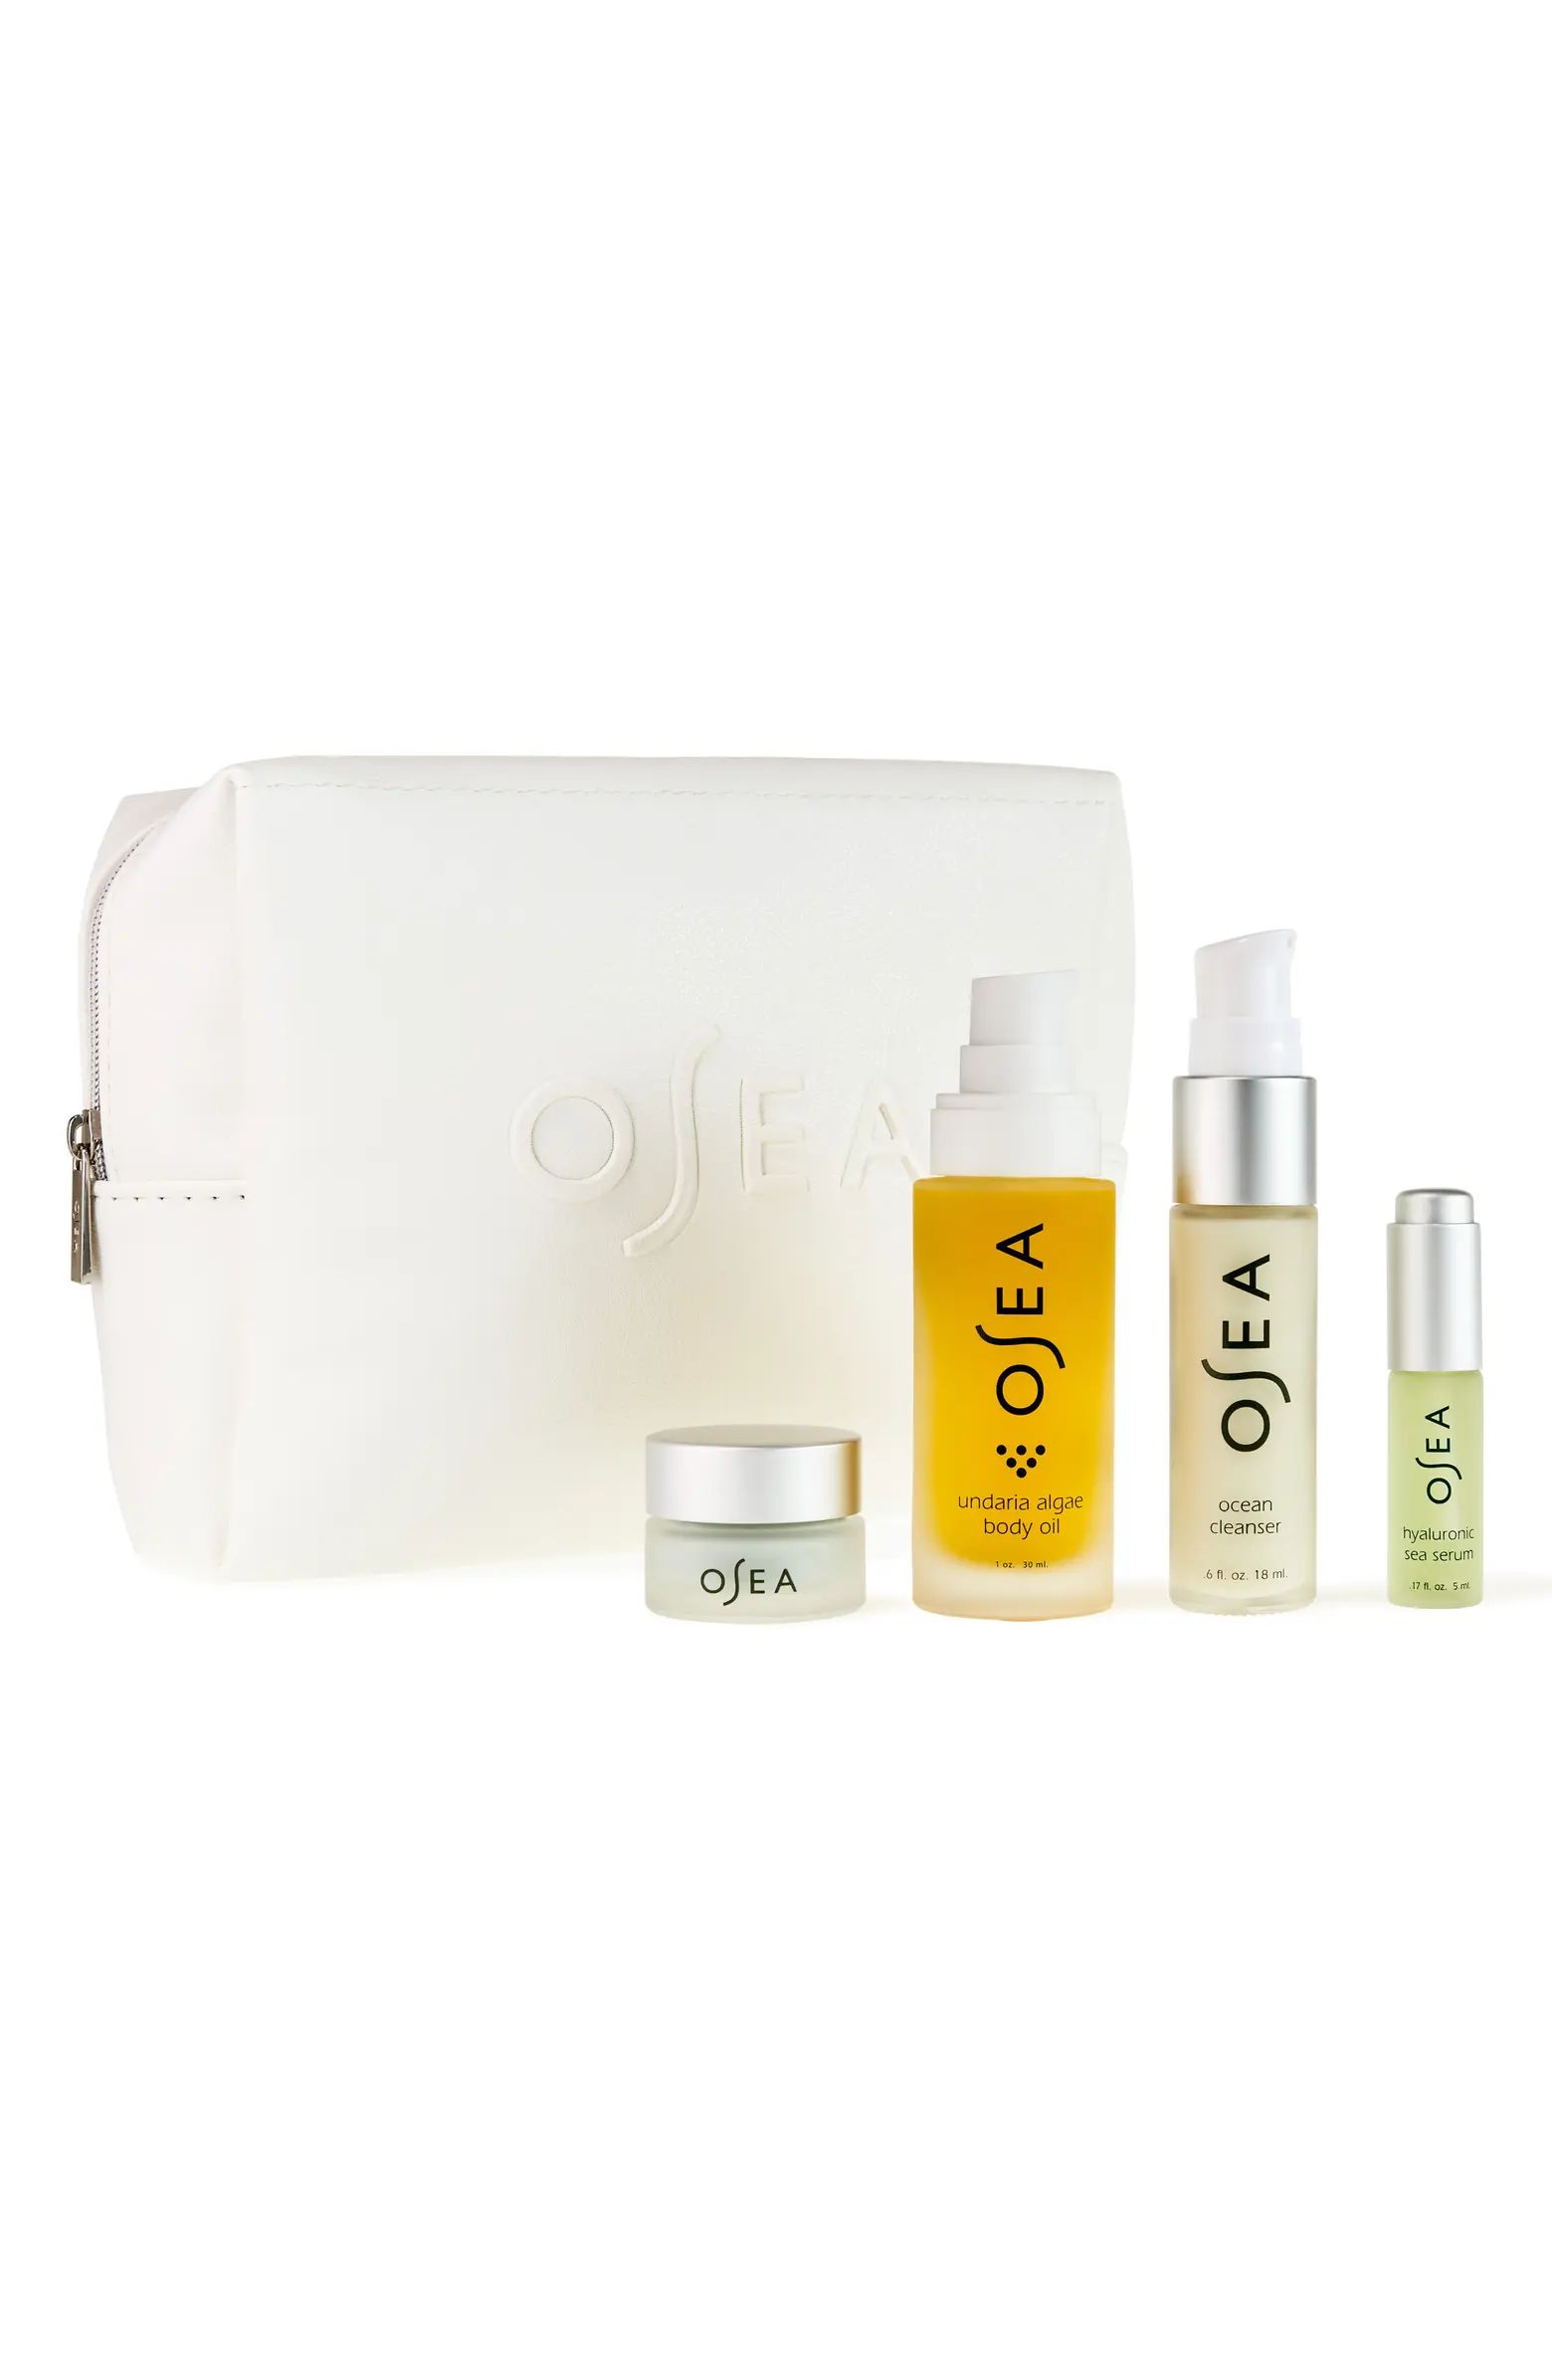 OSEA Bestsellers Discovery Set $70 Value | Nordstrom | Nordstrom